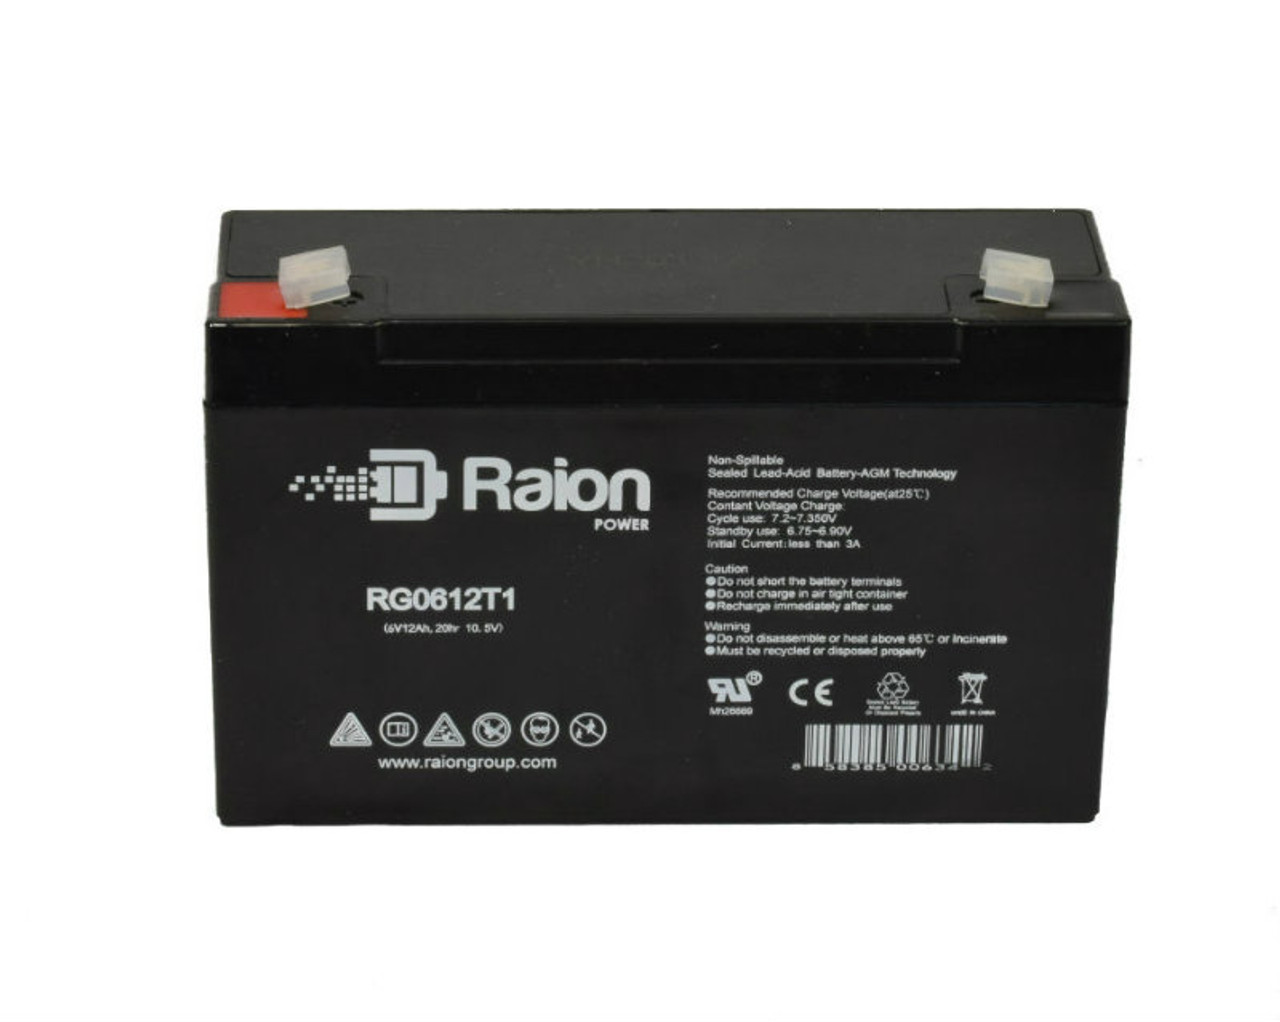 Raion Power RG06120T1 Replacement Battery Cartridge for Minuteman A900